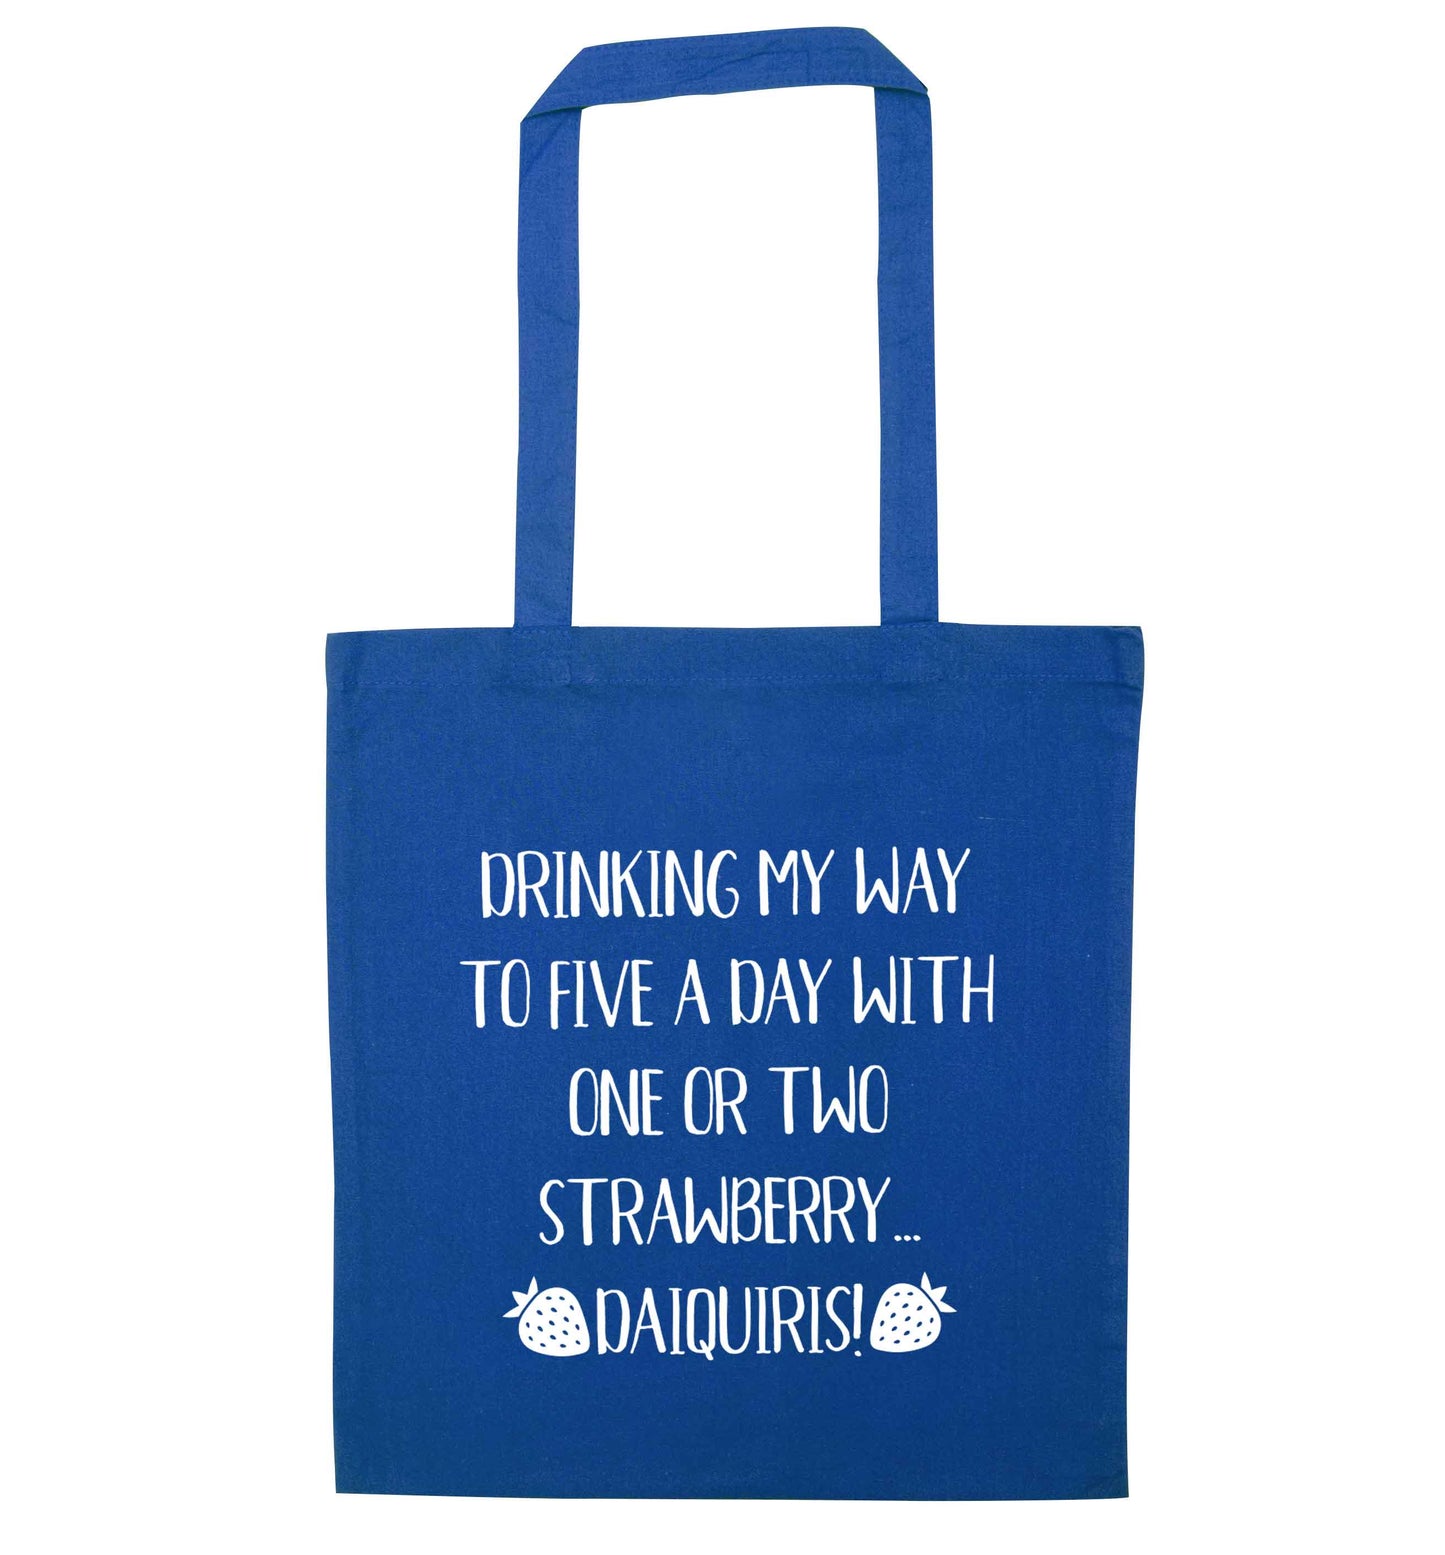 Drinking my way to five a day with one or two straberry daiquiris blue tote bag